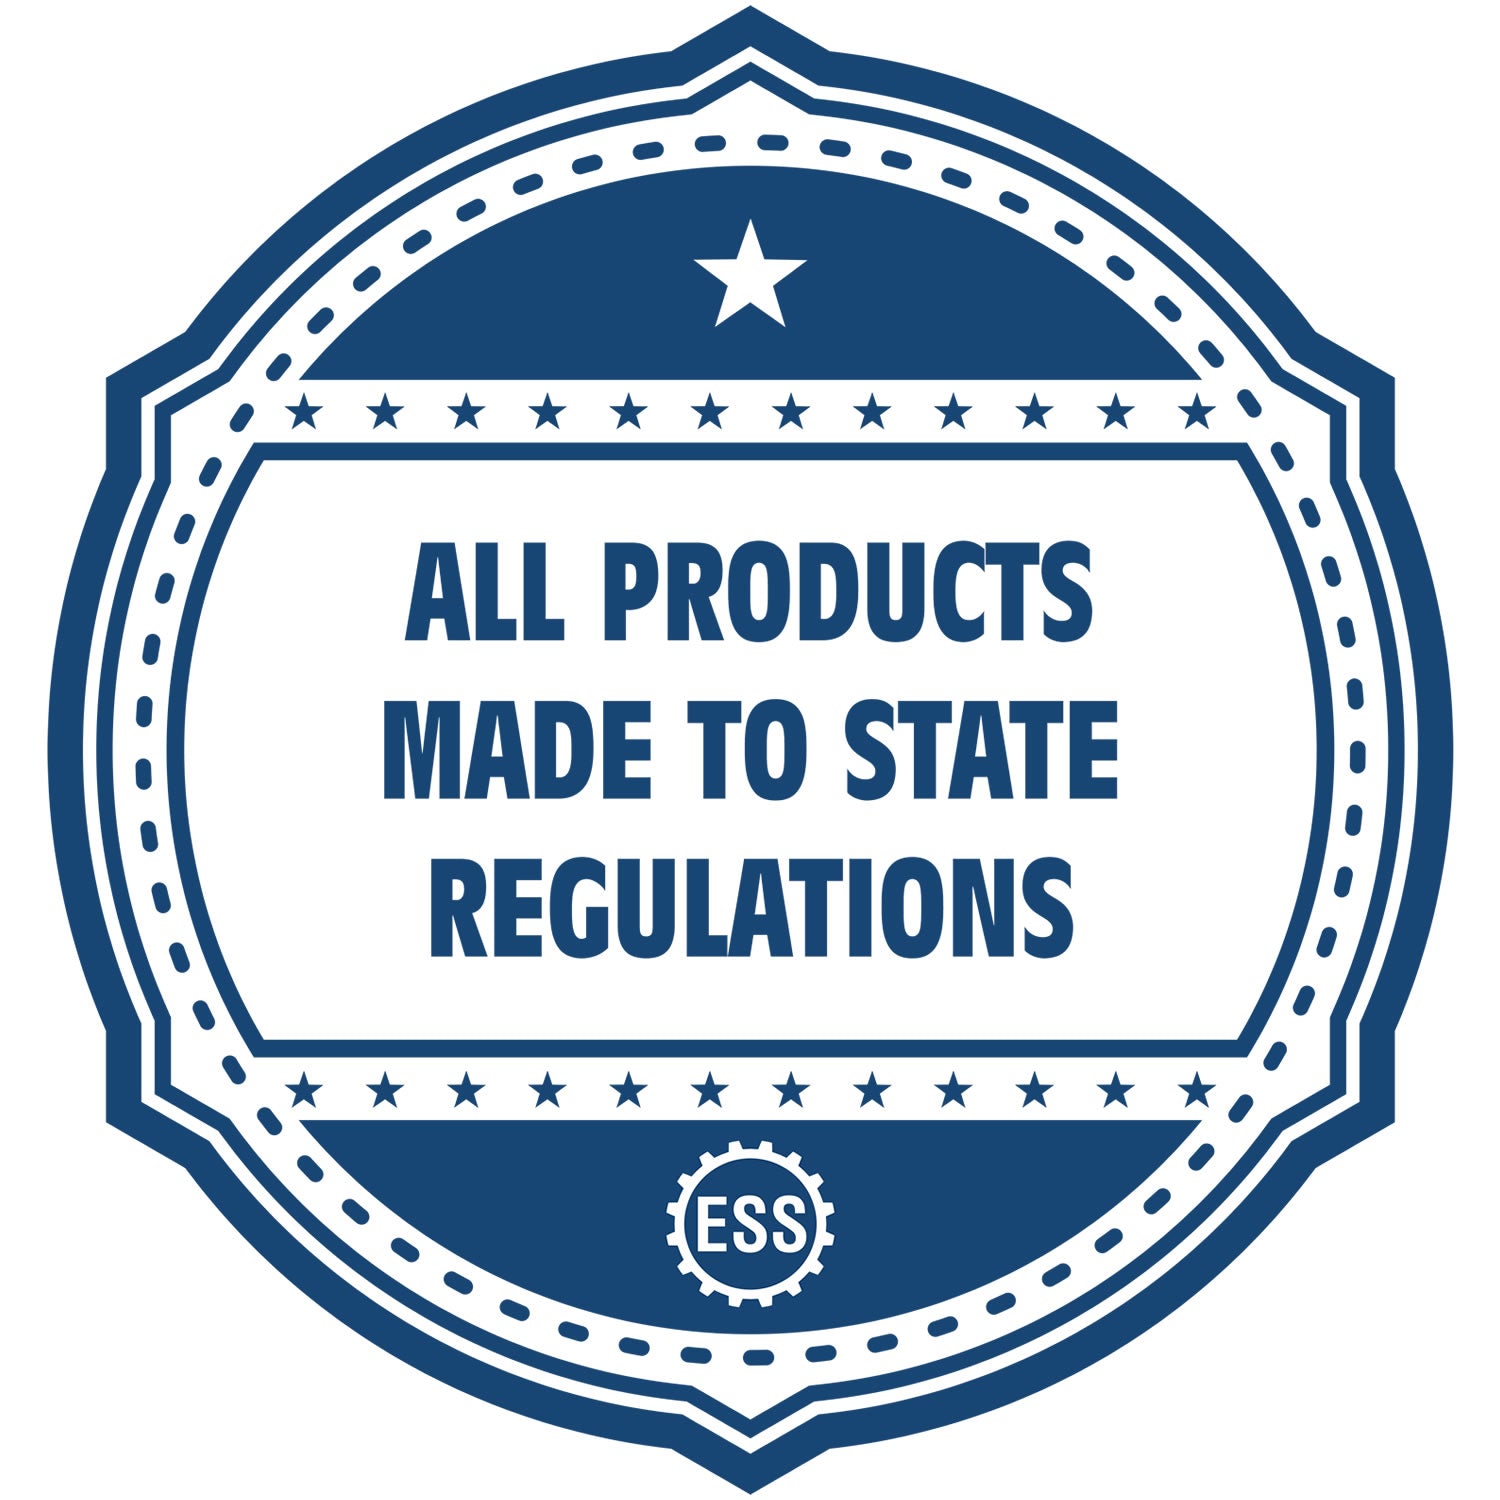 An icon or badge element for the Iowa Engineer Desk Seal showing that this product is made in compliance with state regulations.